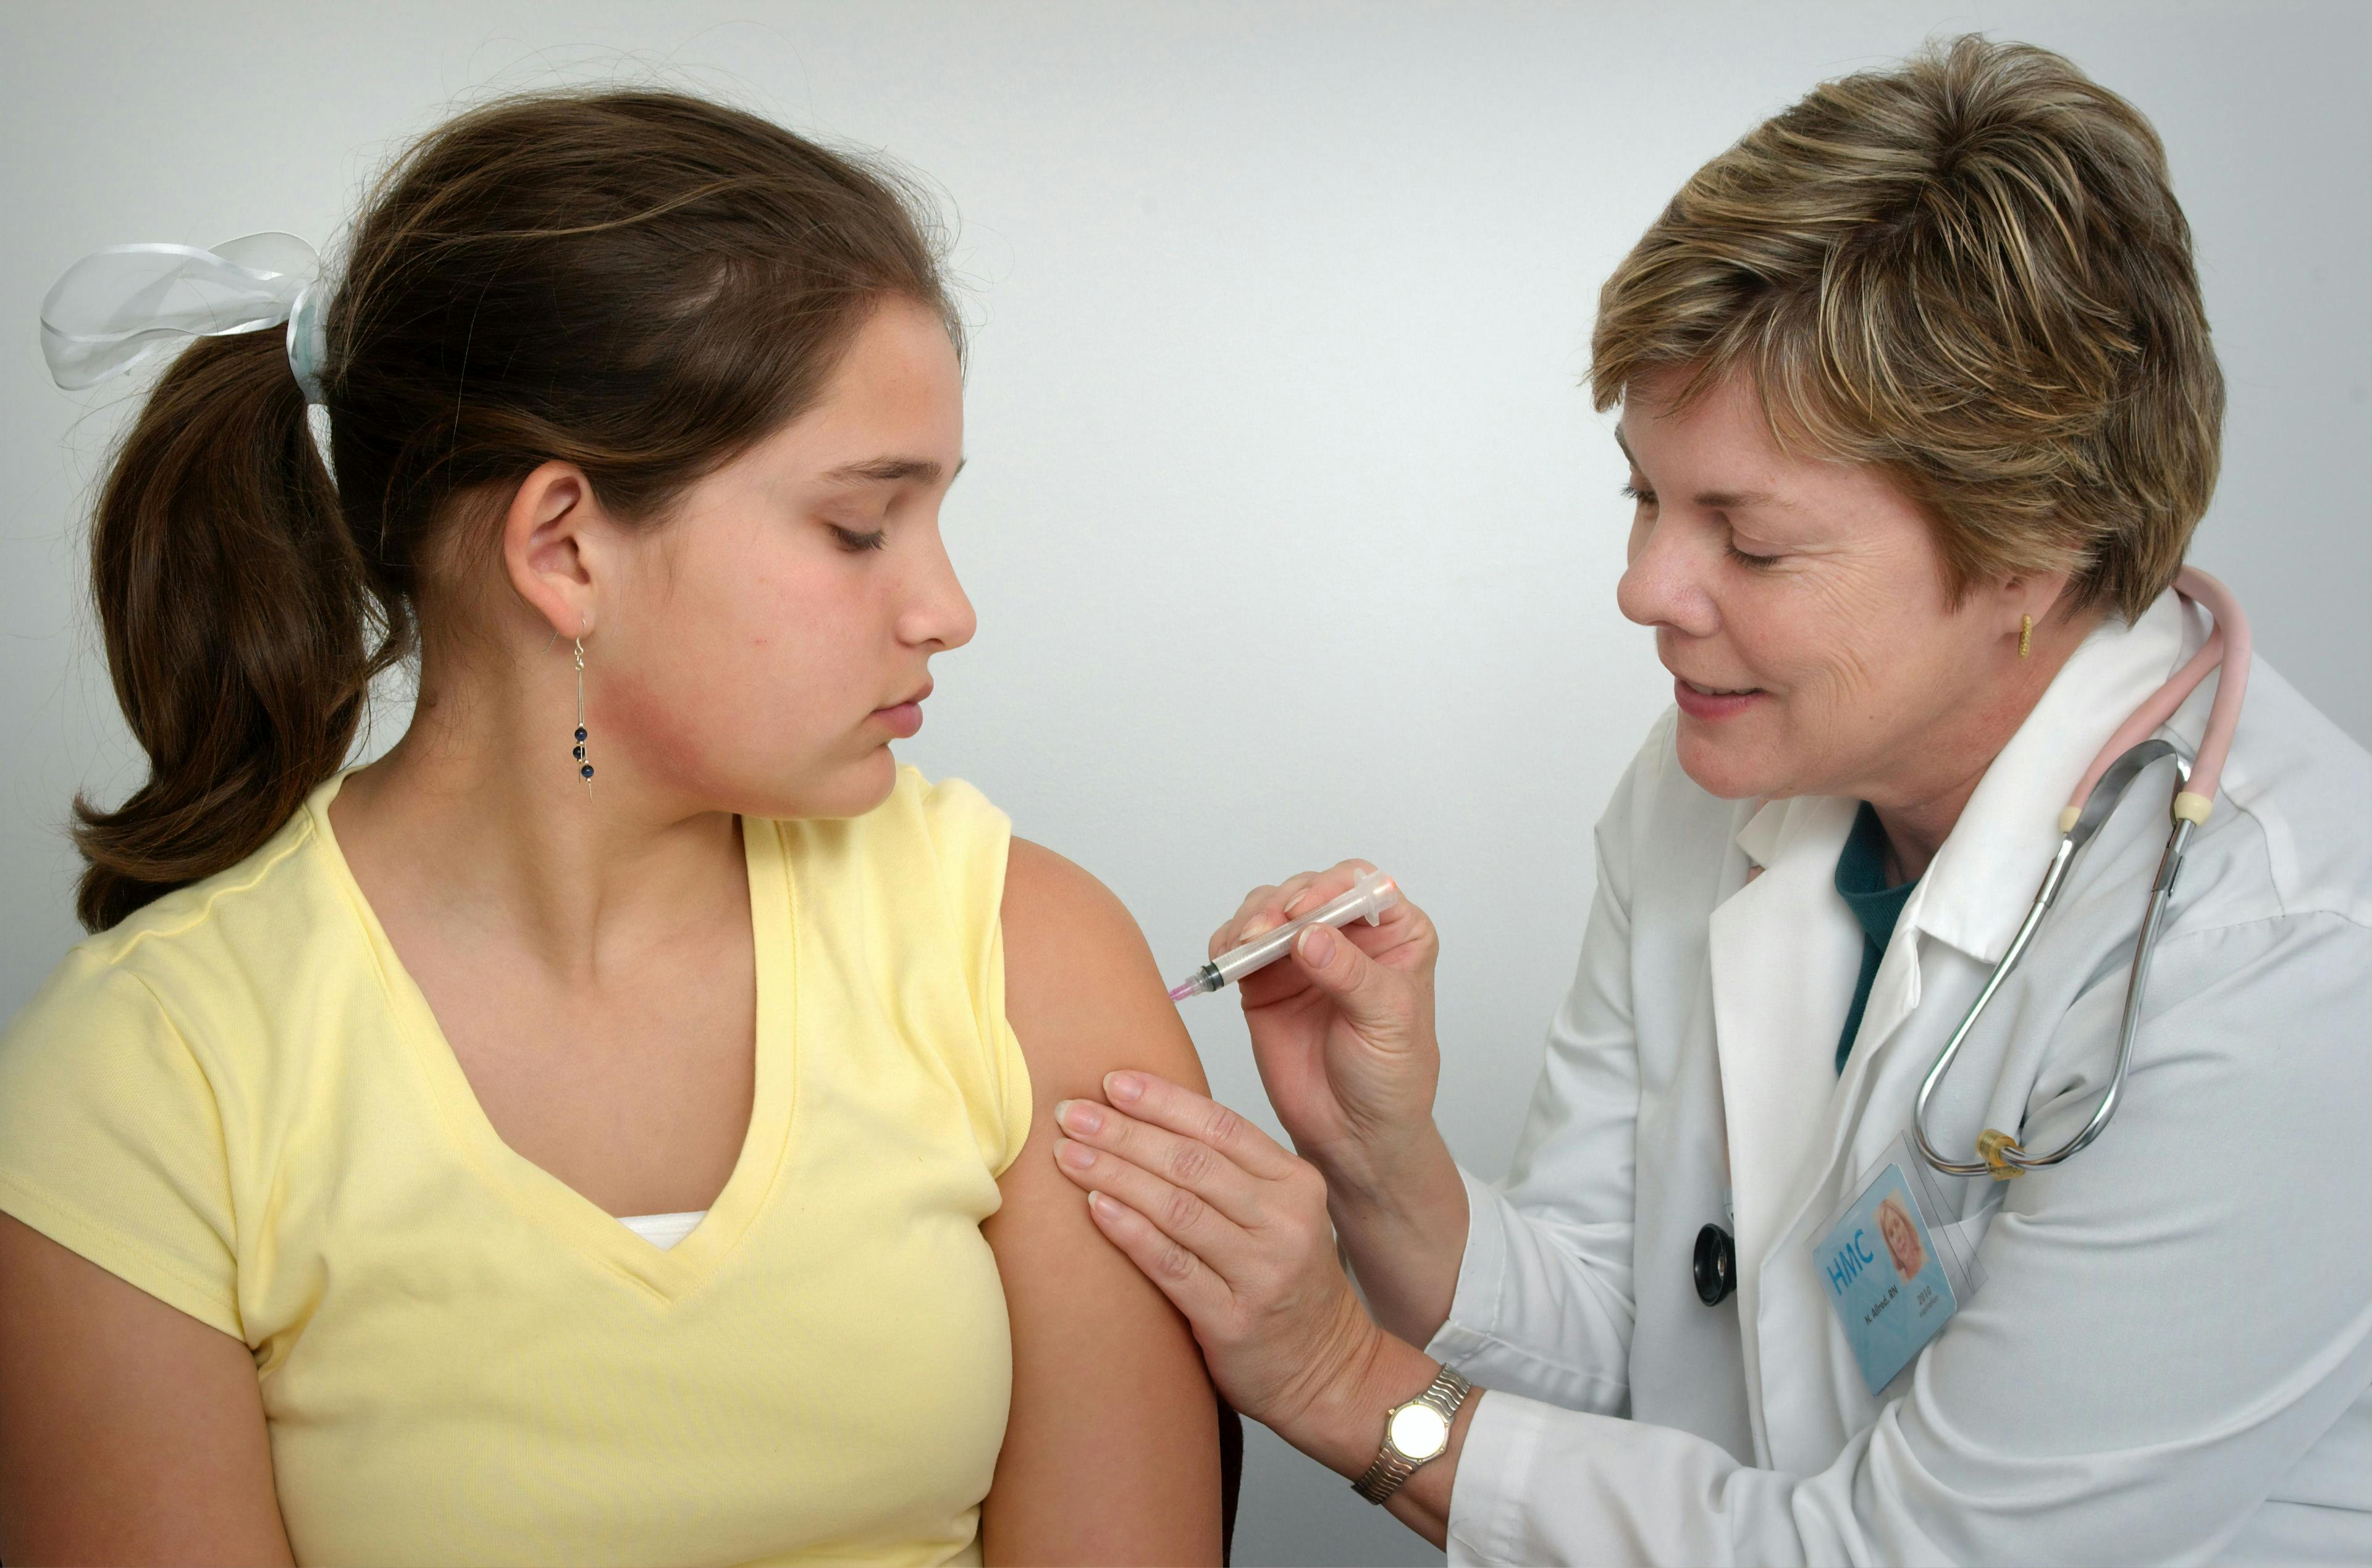 A personal history of cervical cancer or cervical biopsy did not make mothers more likely to vaccinate their children against HPV.